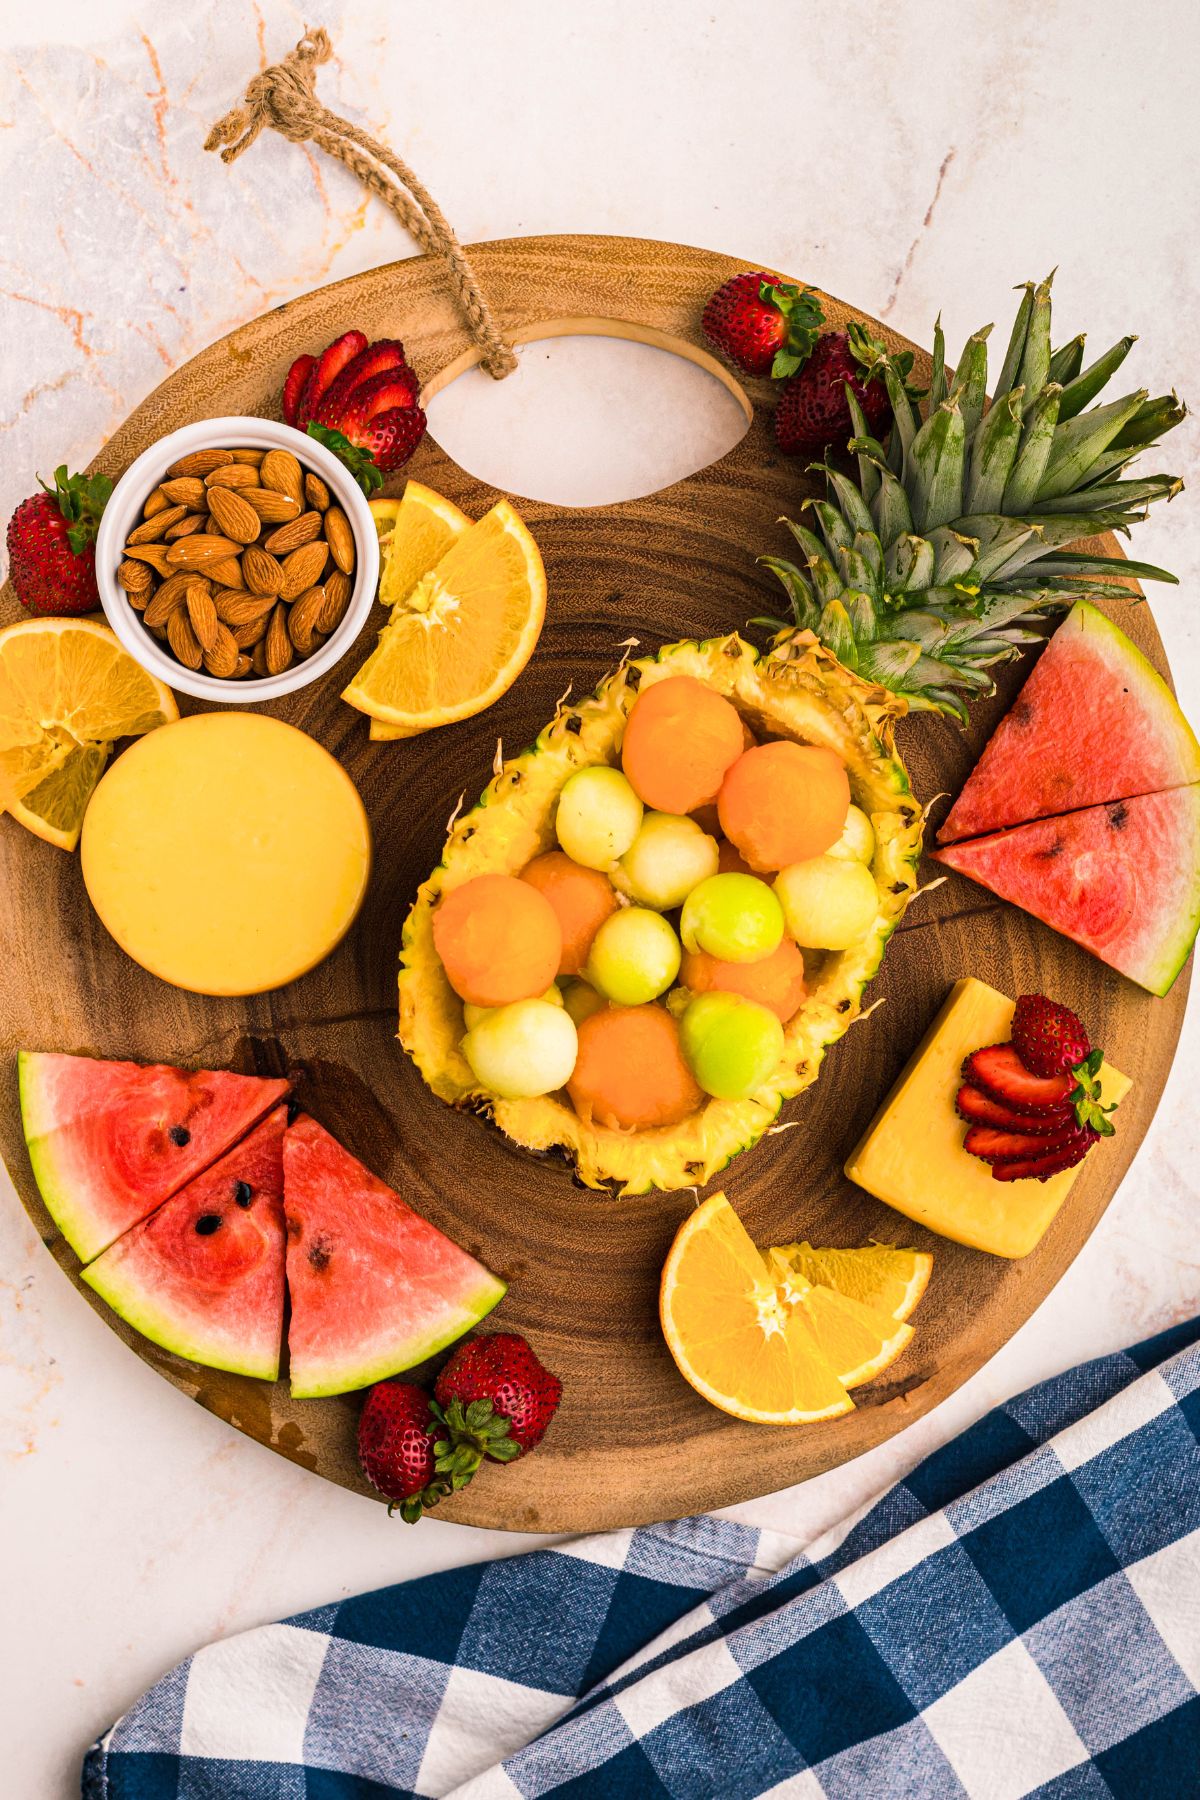 Large pieces of fruits like watermelon and emptied pineapple on a round charcuterie board.